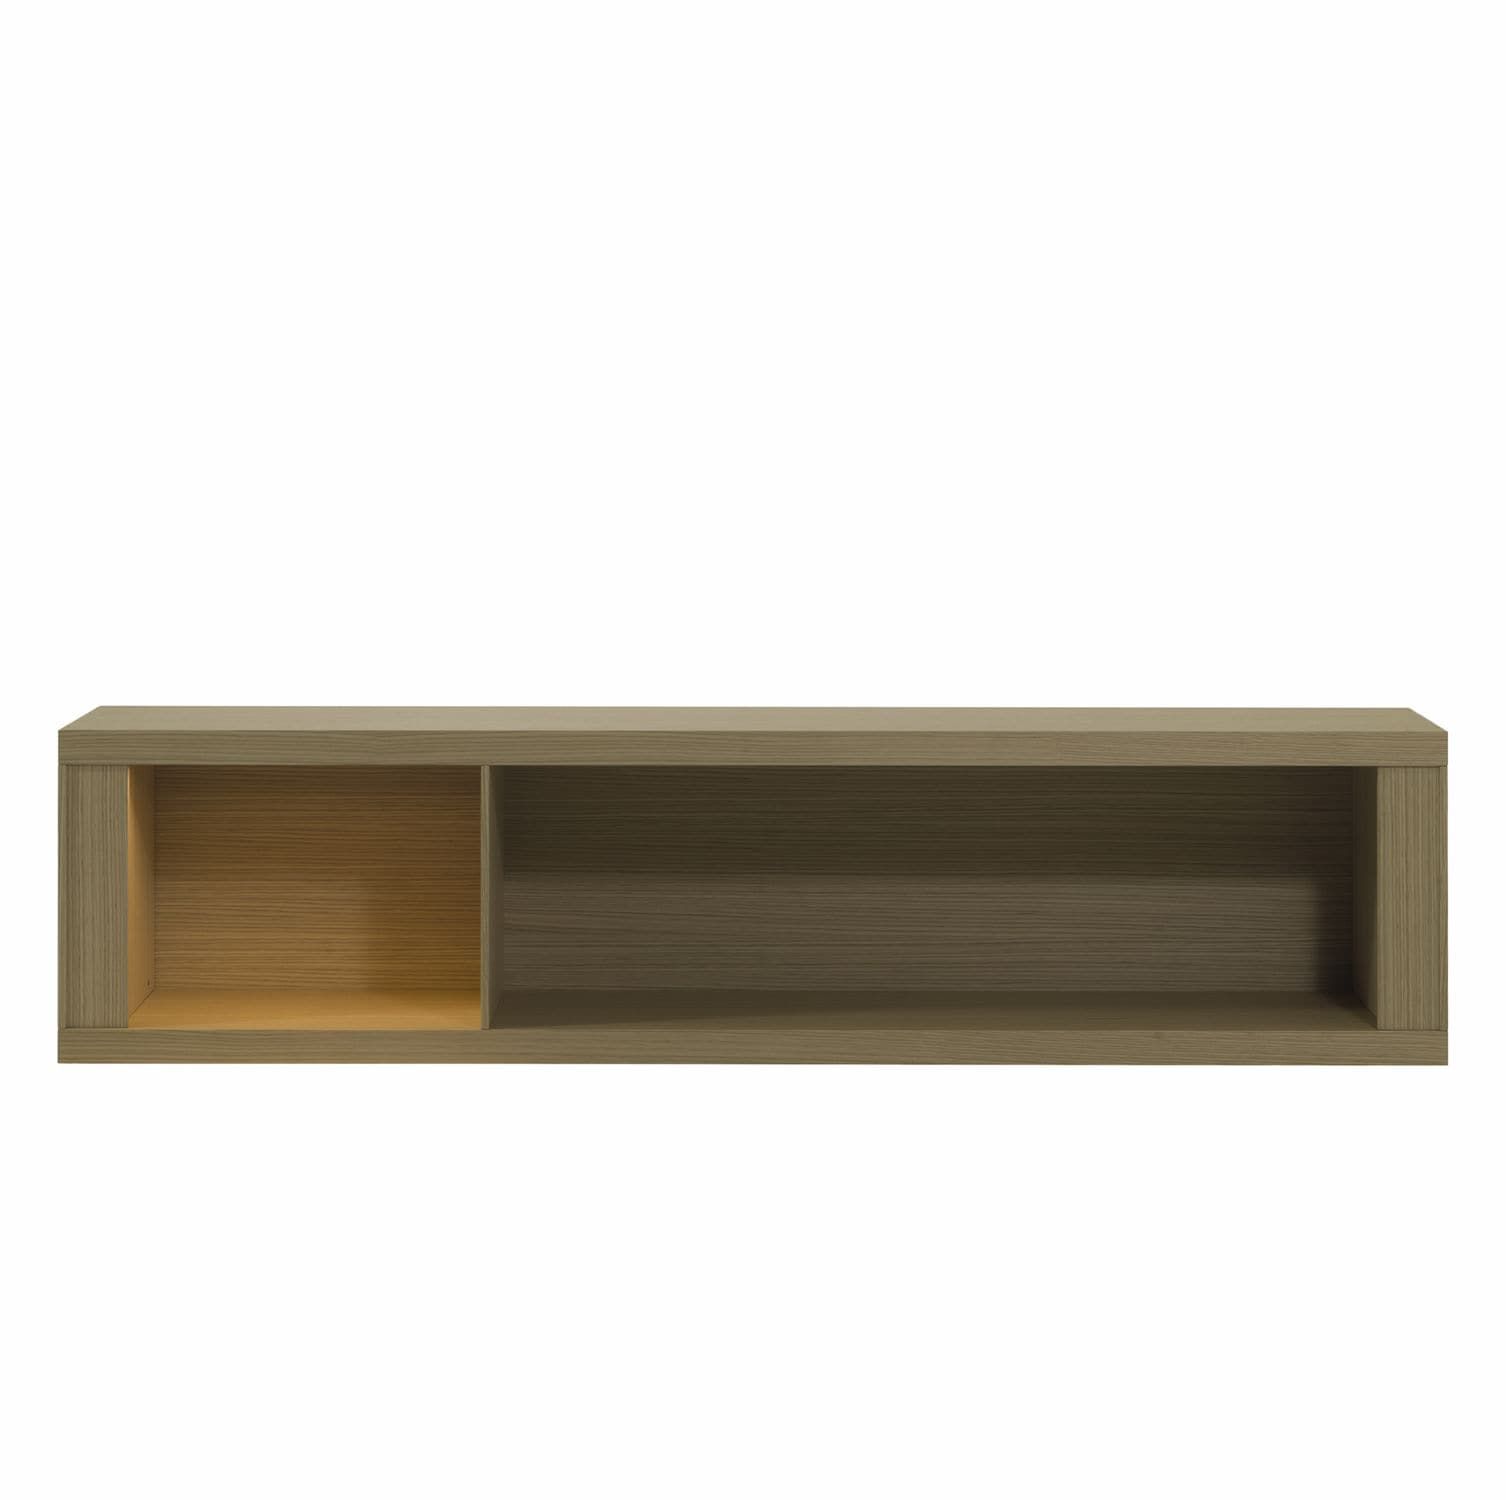 Niedriges Regal / Modern / Aus Eiche / Aus Ebenholz Pertaining To Tribeca Sideboards (View 24 of 30)